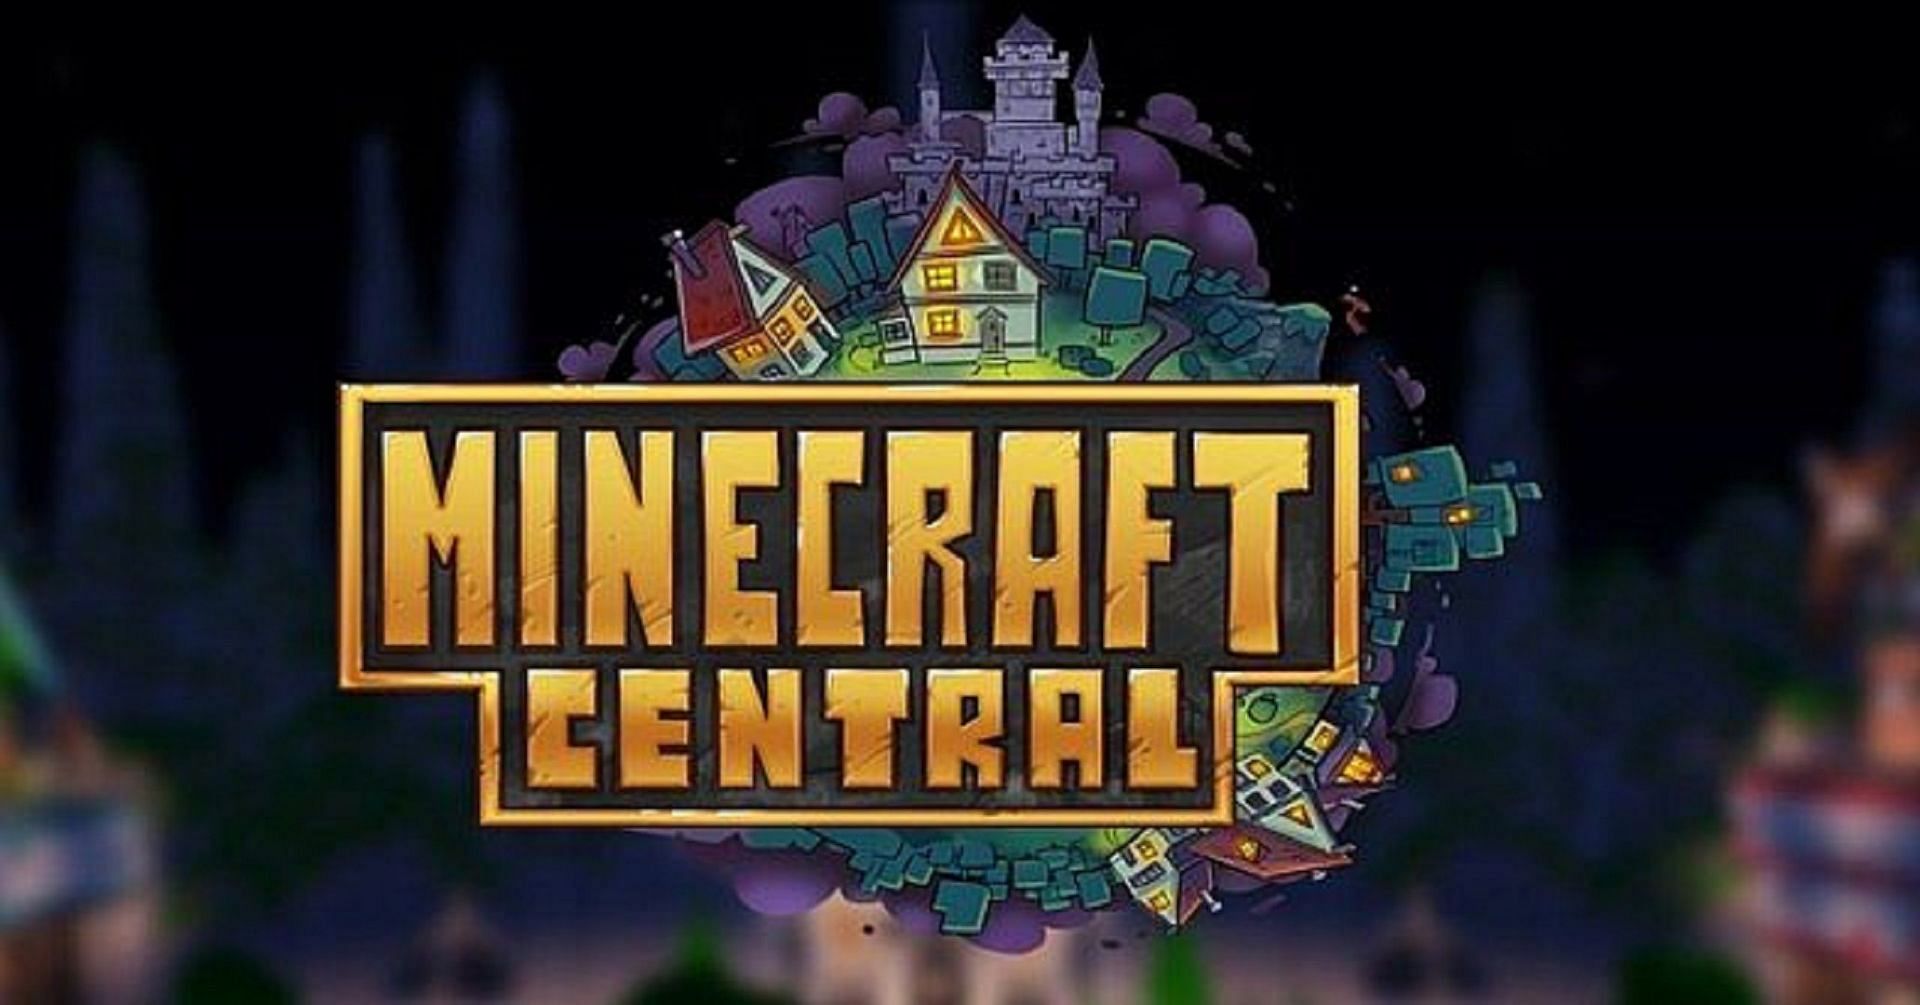 Minecraft Central&#039;s official logo (Image via Mccentral.org)